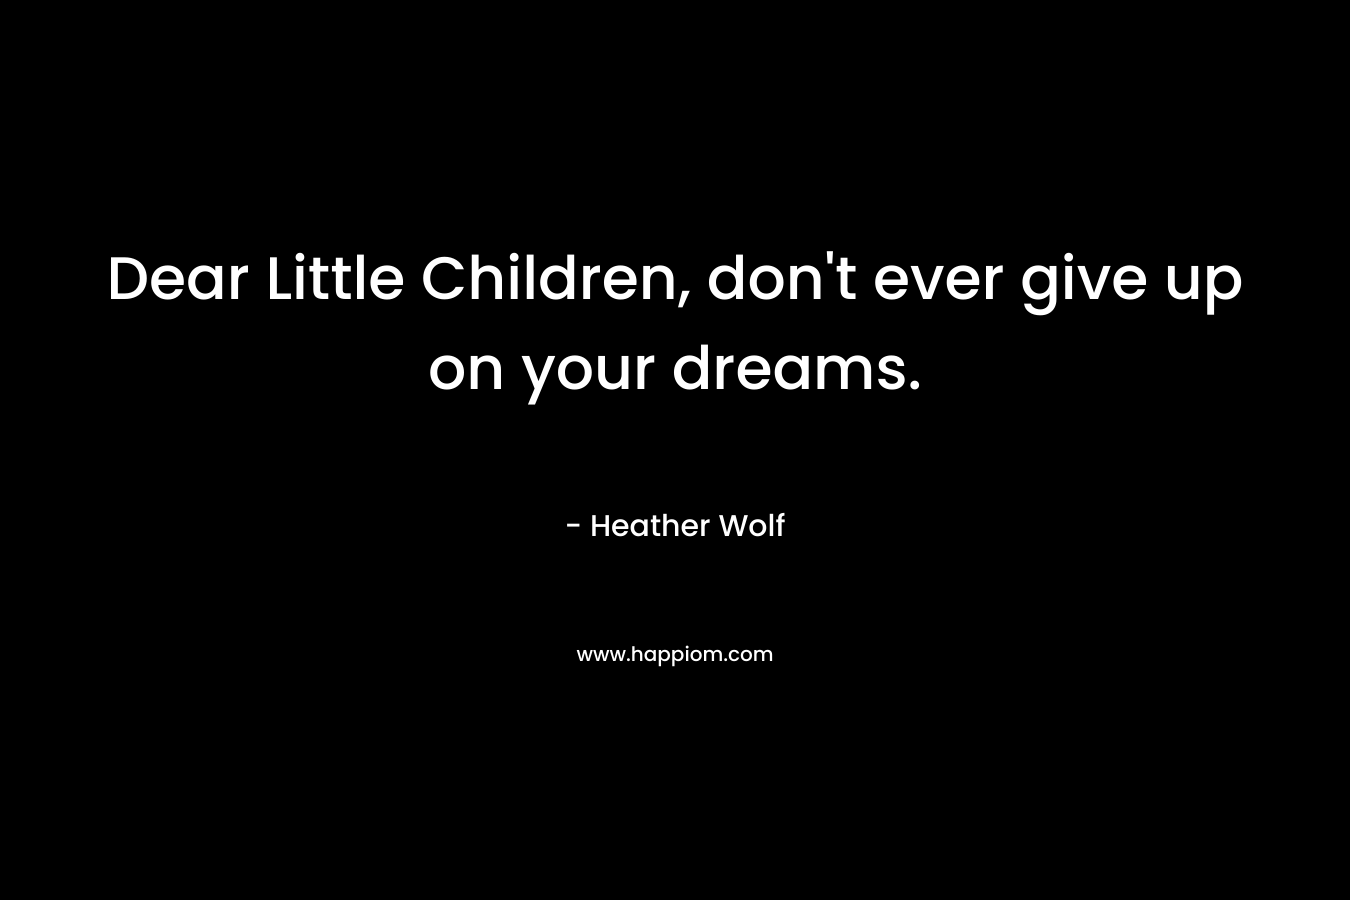 Dear Little Children, don’t ever give up on your dreams. – Heather Wolf